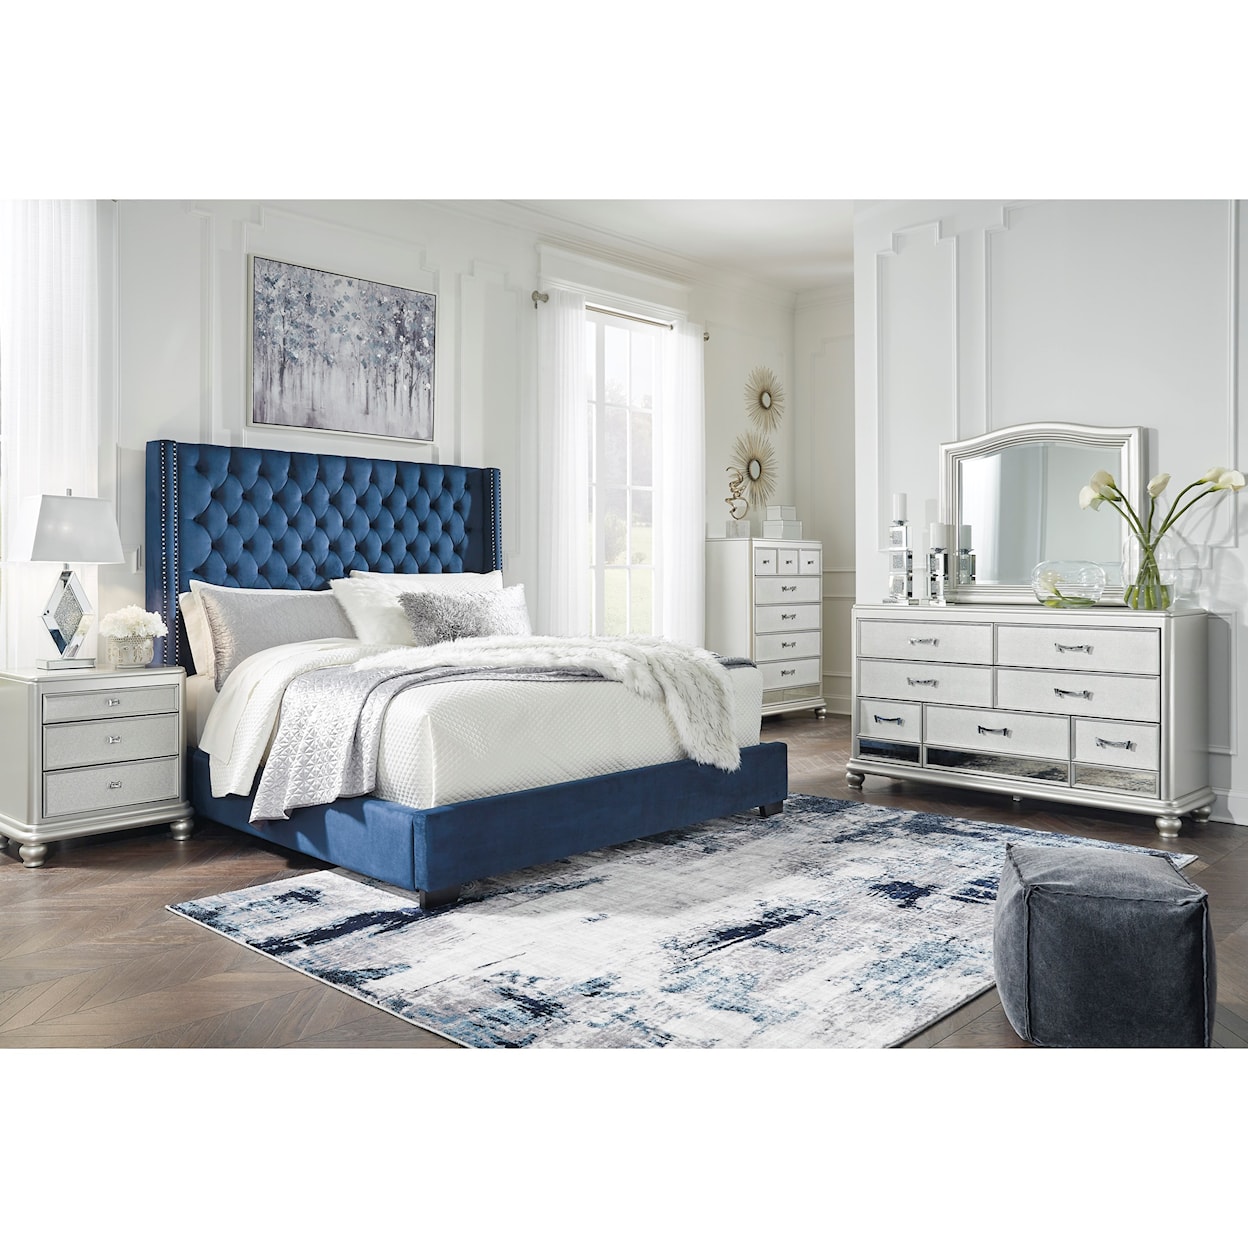 Signature Design by Ashley Furniture Coralayne King Bedroom Group